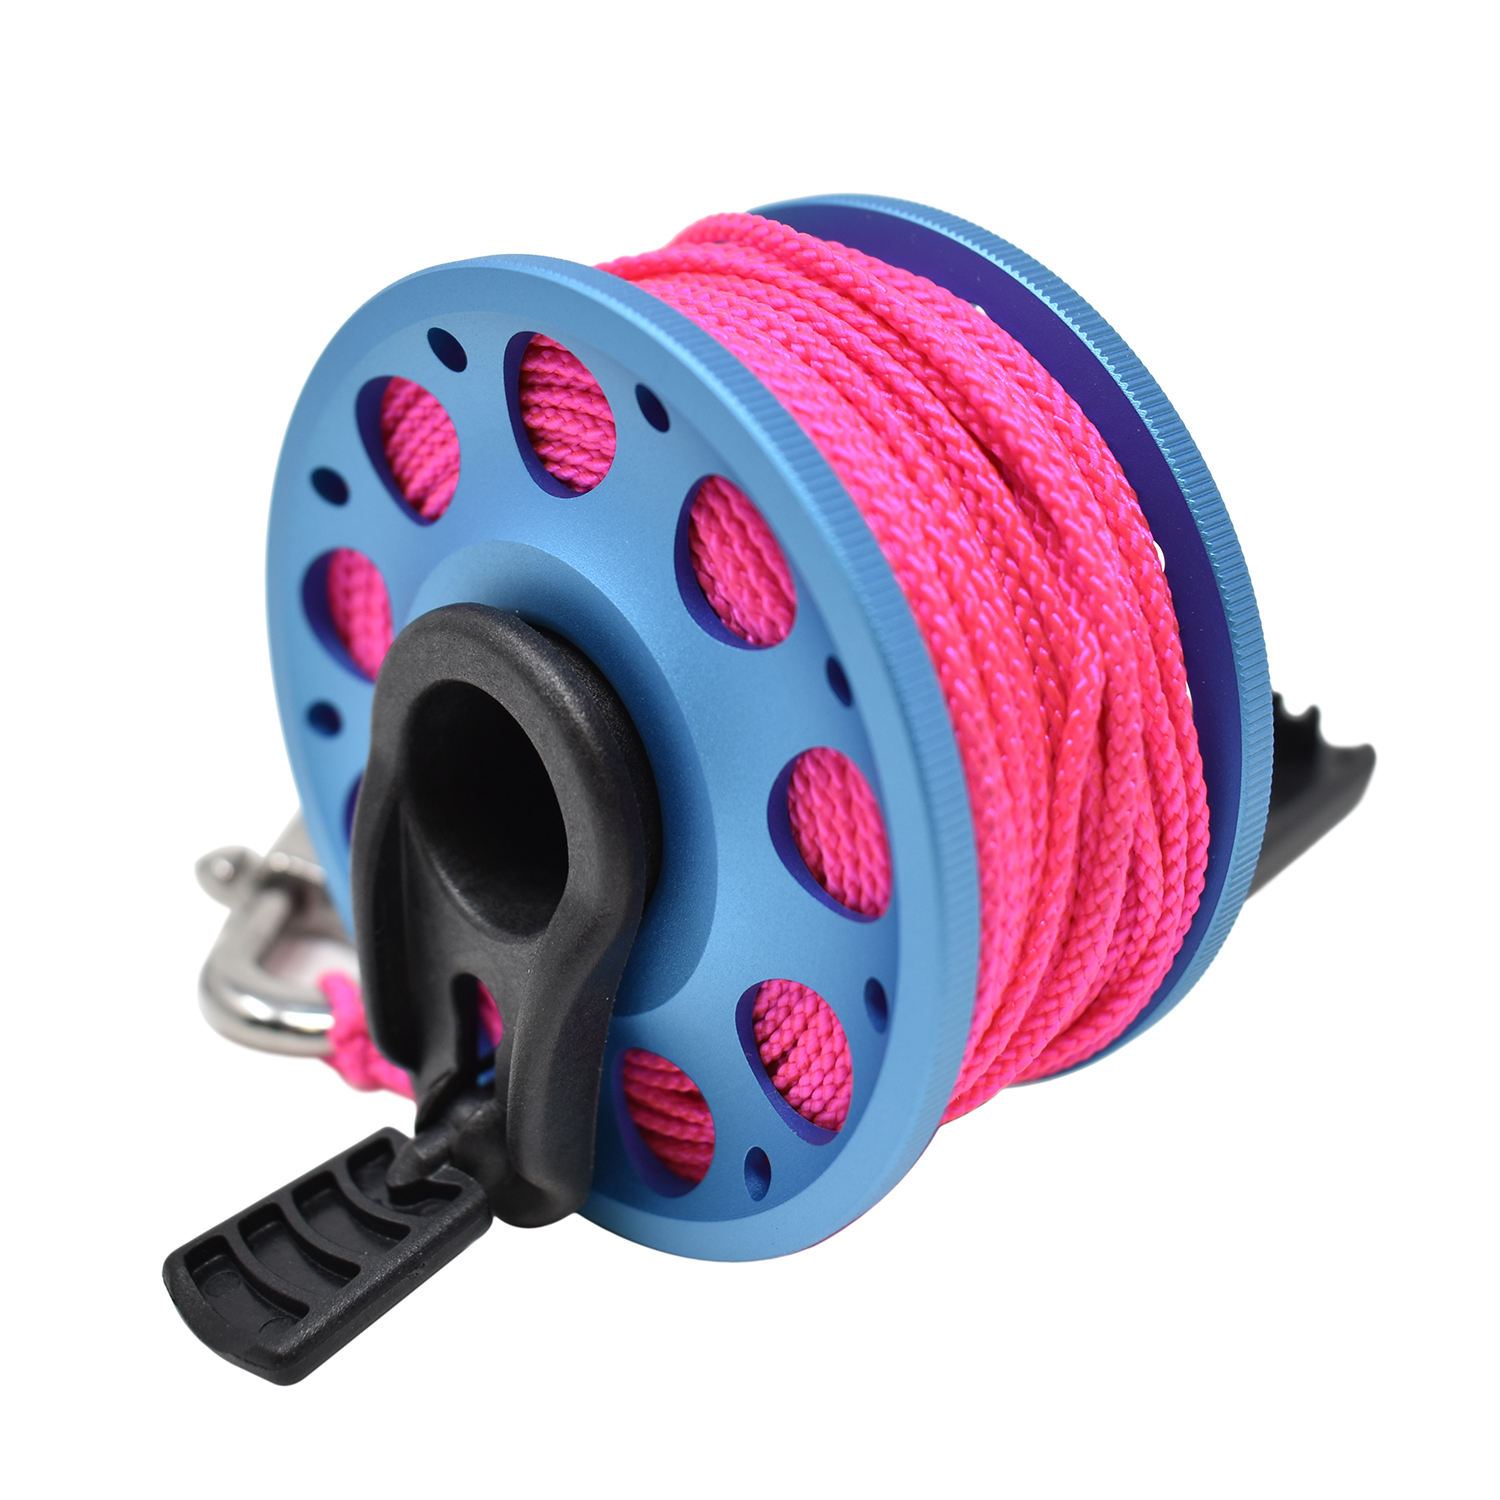 Aluminum Finger Spool 100ft Dive Reel w/ Retractable Holder, Baby Blue/Pink - image 2 of 4